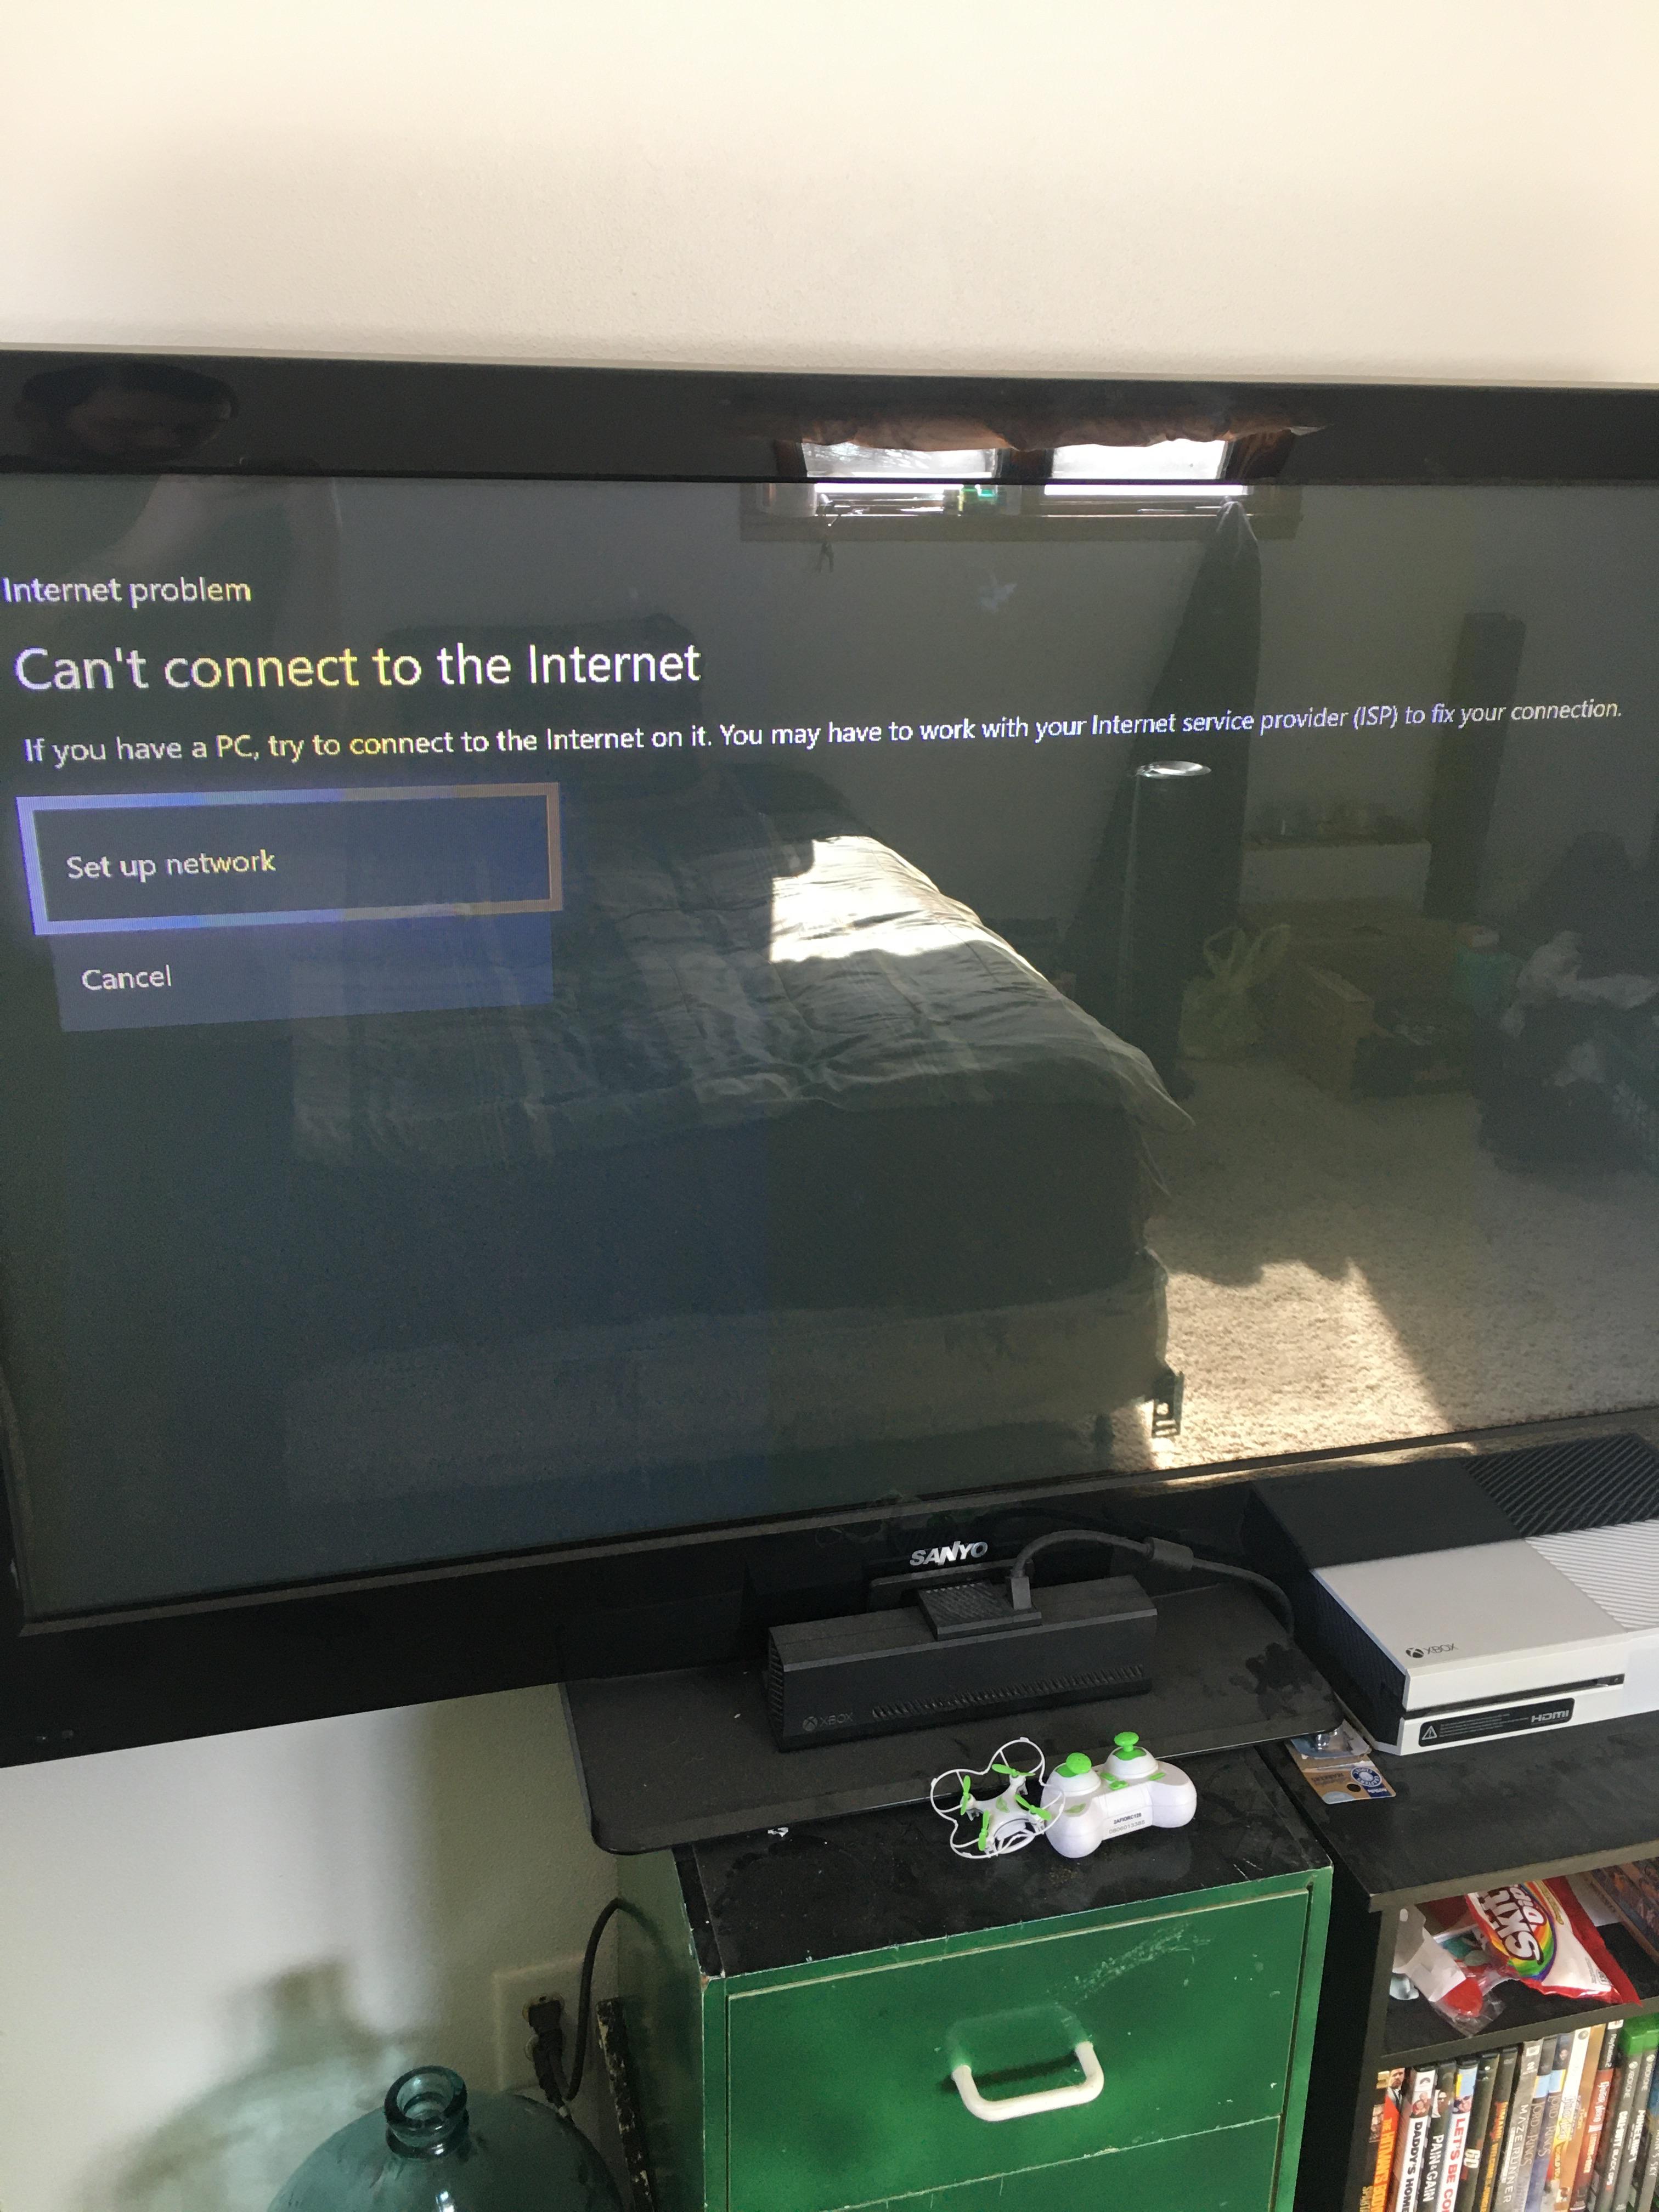 Ensure that your Xbox One is connected to a stable and reliable internet connection
If you are using a wireless connection, try switching to a wired connection for better stability